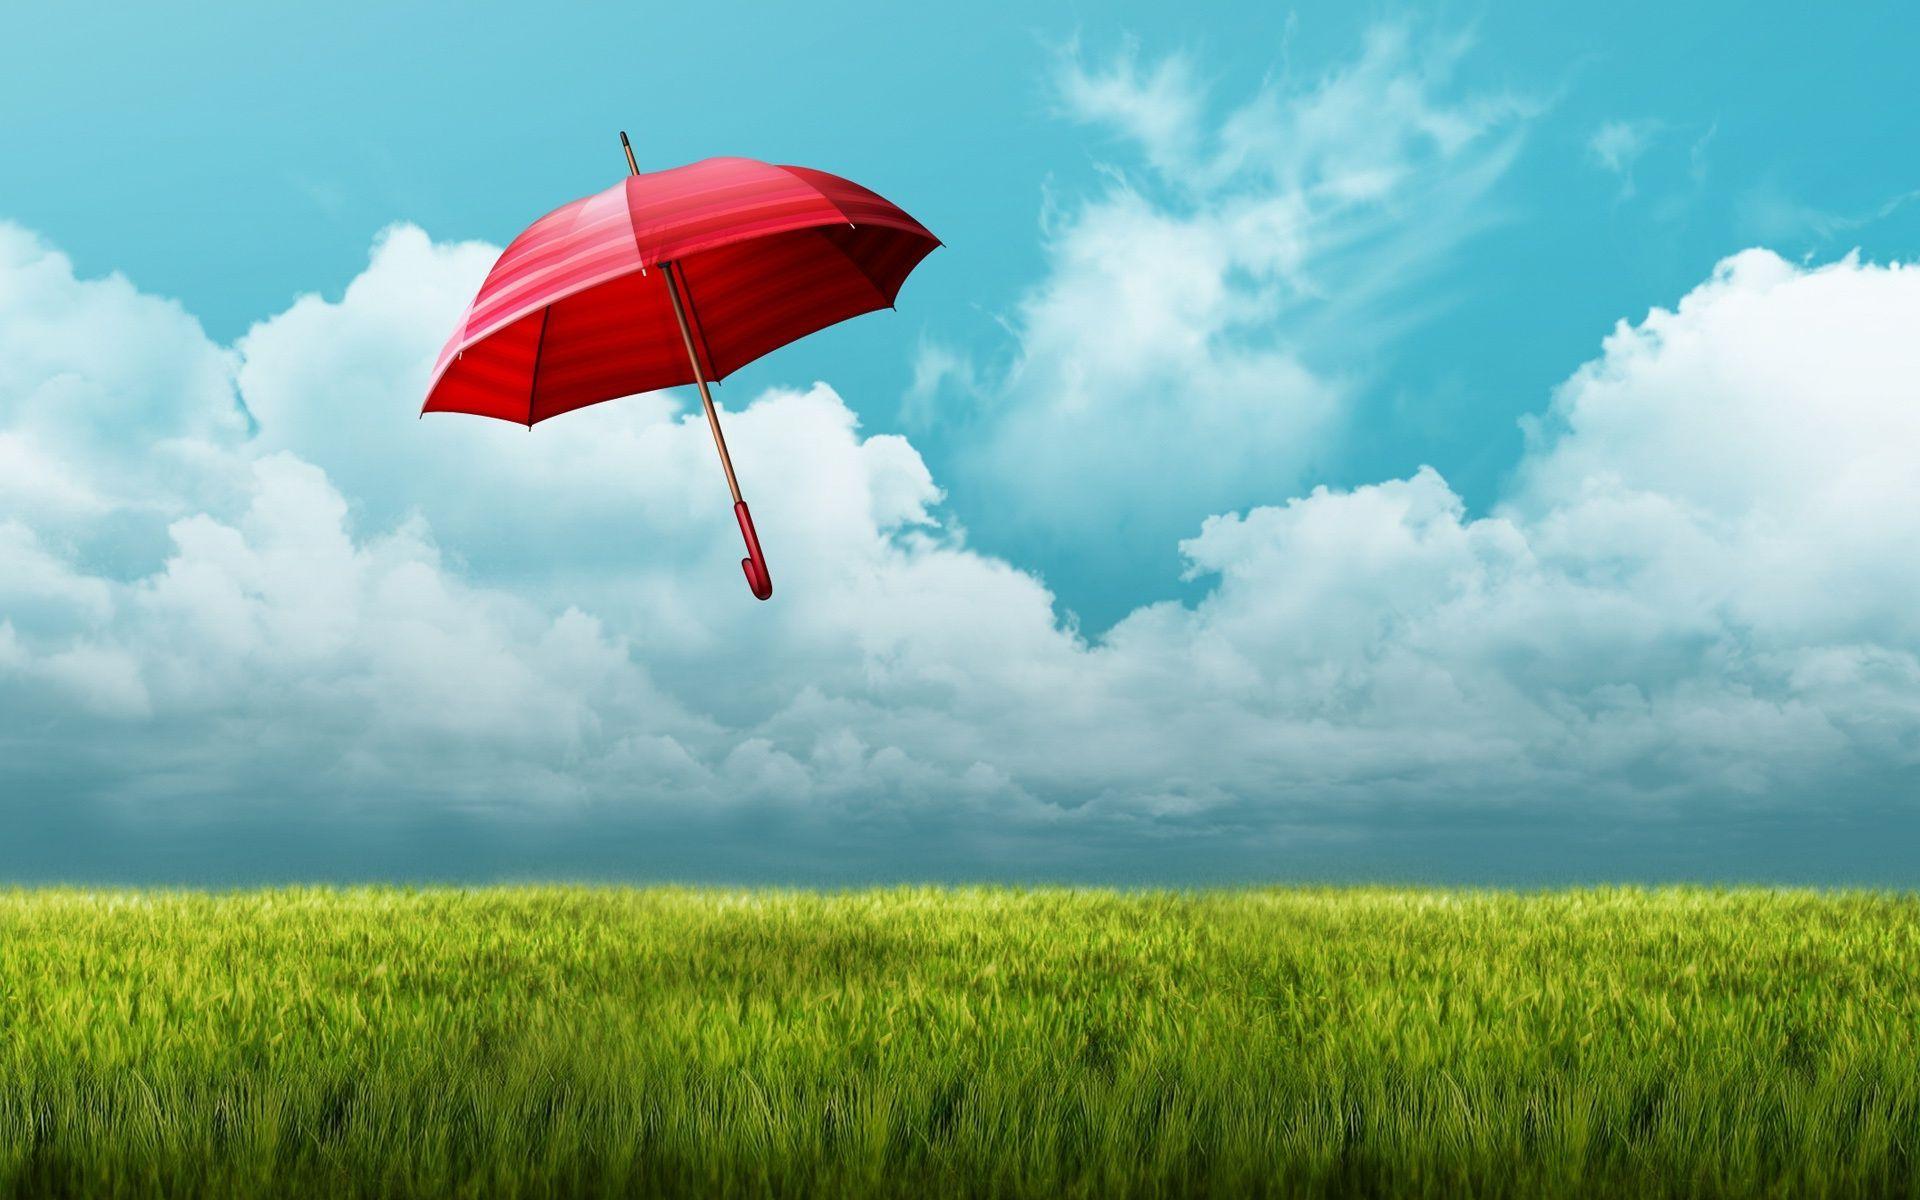 HD Umbrella flying above the green field Wallpaper. Download Free